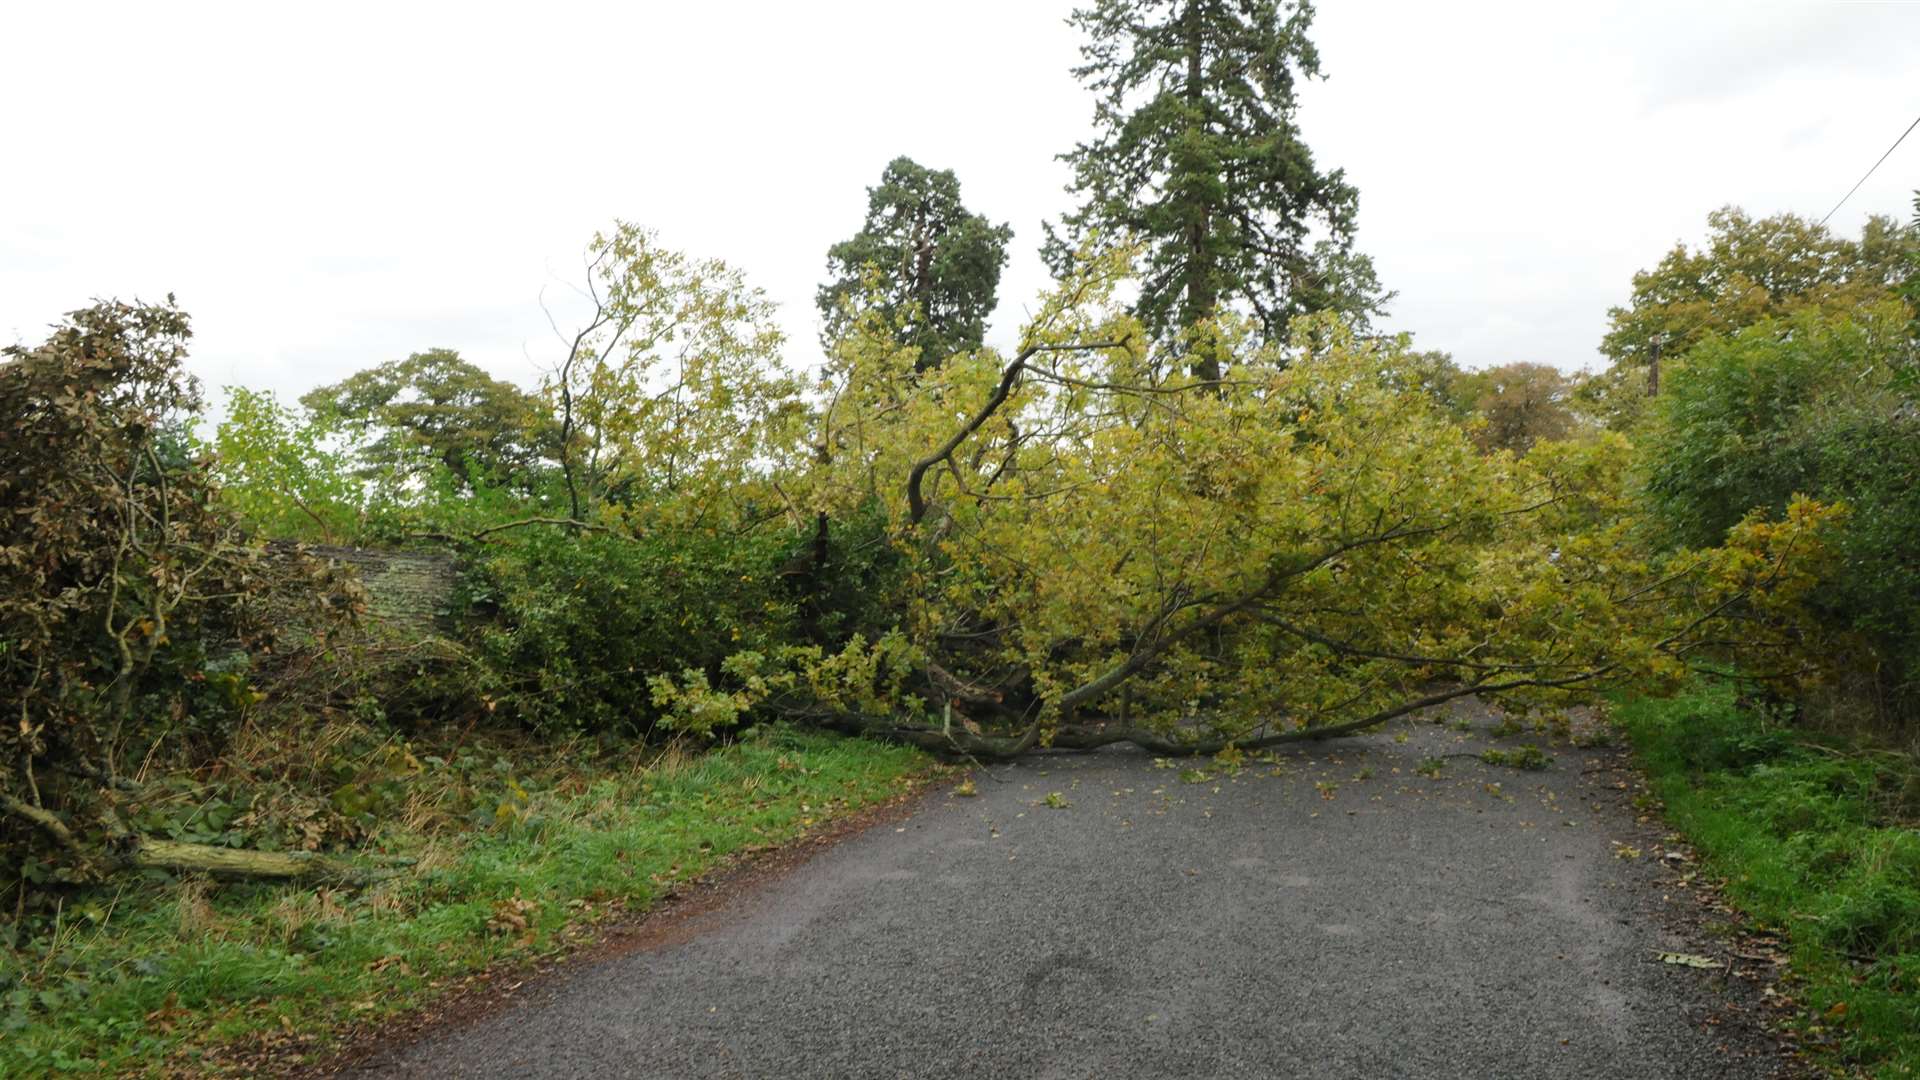 A tree blown over in winds. Stock image